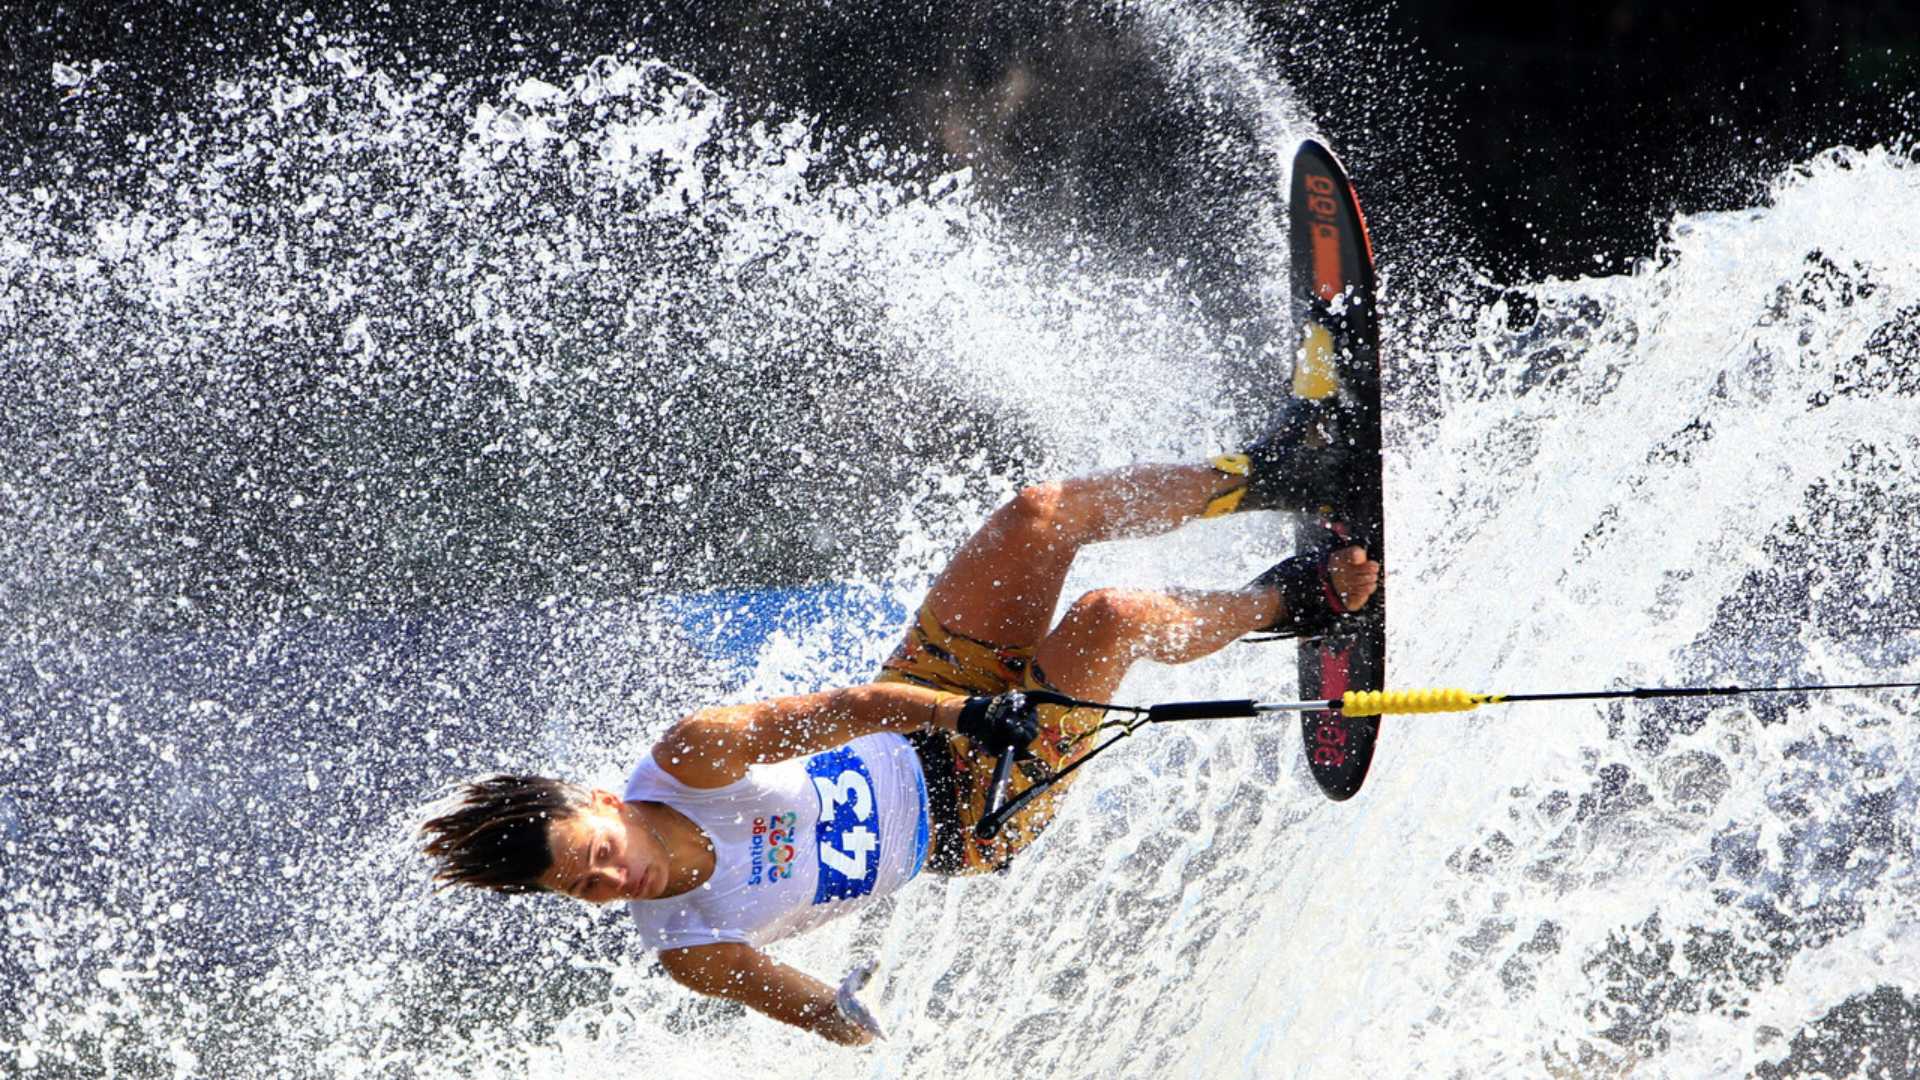 Matías González secures bronze medal for Chile in water skiing